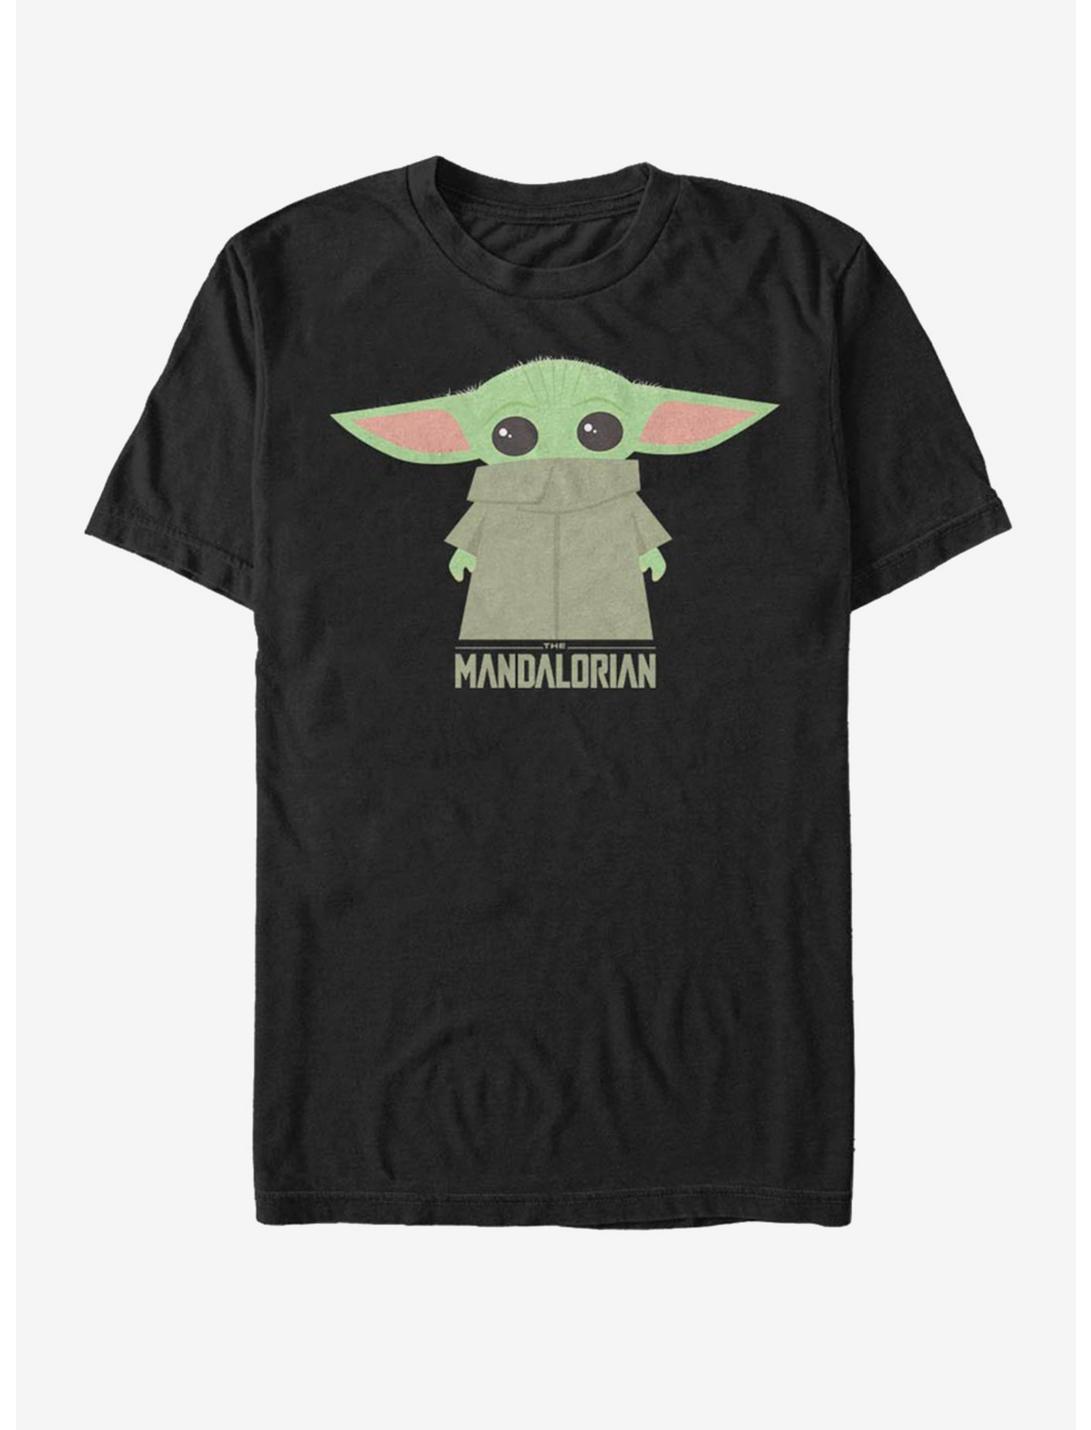 Star Wars The Mandalorian The Child Covered Face T-Shirt, BLACK, hi-res